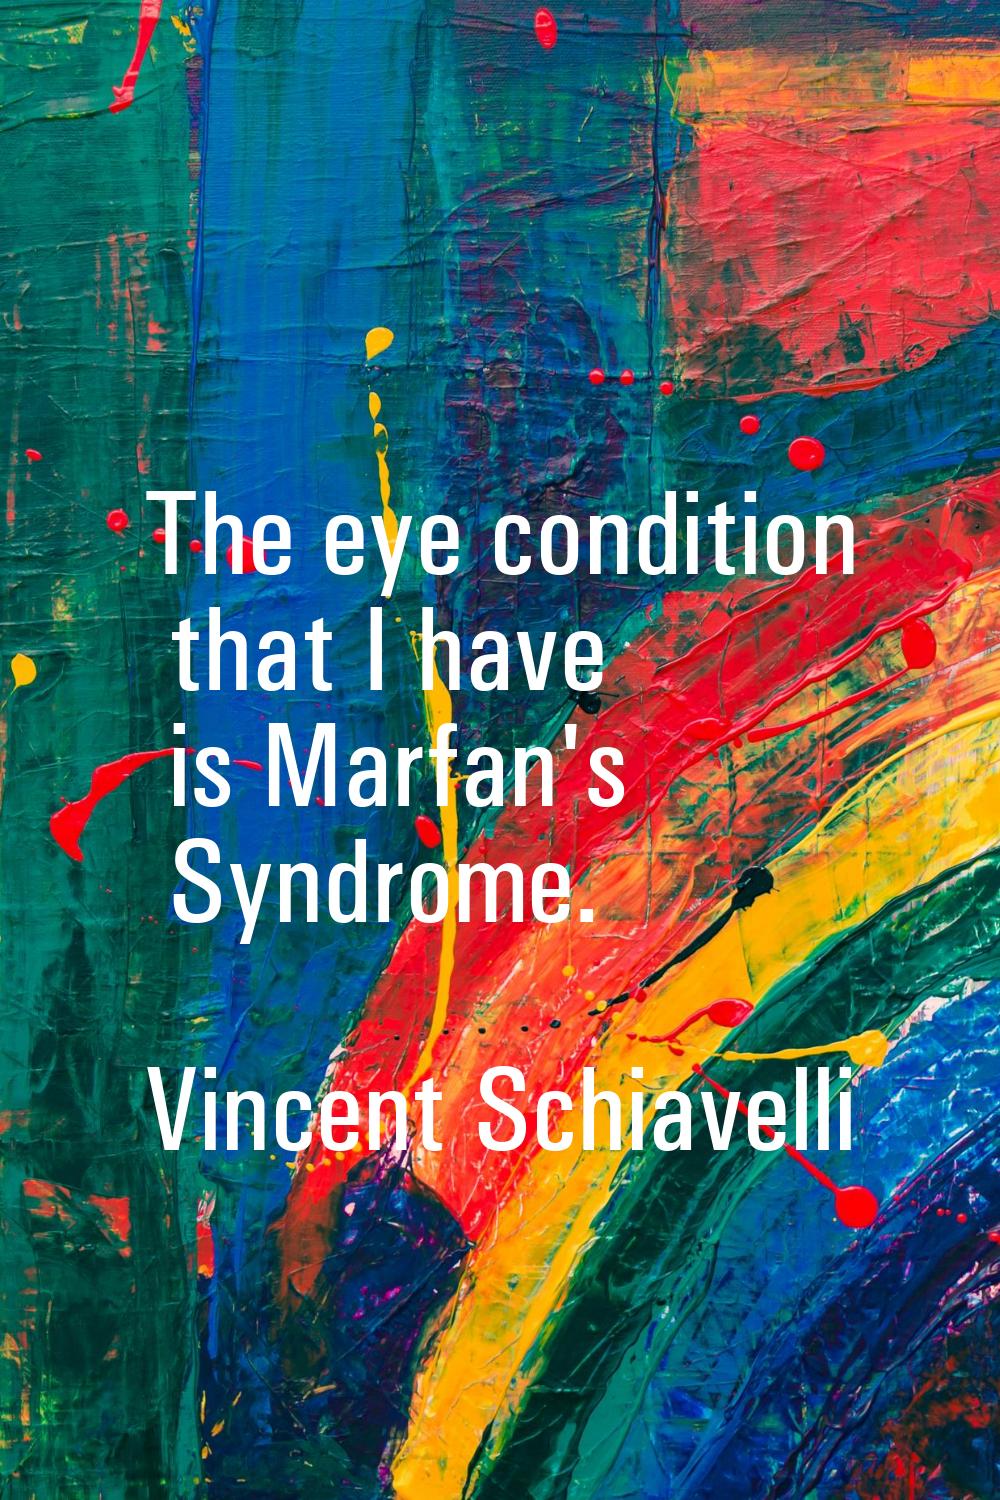 The eye condition that I have is Marfan's Syndrome.